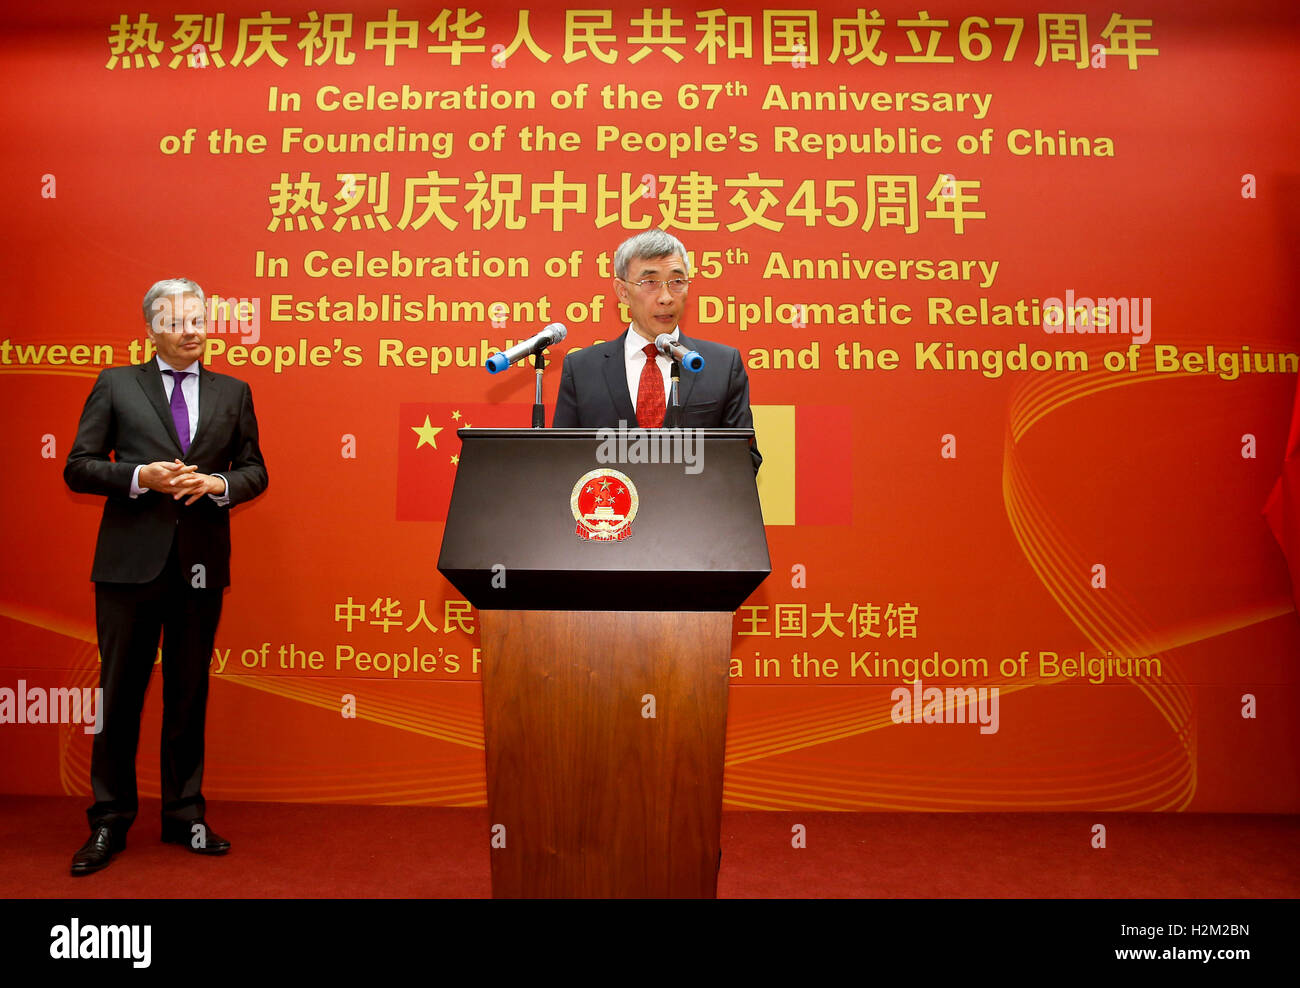 Brussels, Brussels. 28th Sep, 2016. Qu Xing (R), Chinese ambassador to Belgium, addresses a reception held to celebrate the 67th anniversary of the founding of the People's Republic of China and the 45th anniversary of the establishment of the diplomatic relations between the People's Republic of China and the Kingdom of Belgium, in Brussels, Belgium Sept. 28, 2016. © Ye Pingfan/Xinhua/Alamy Live News Stock Photo